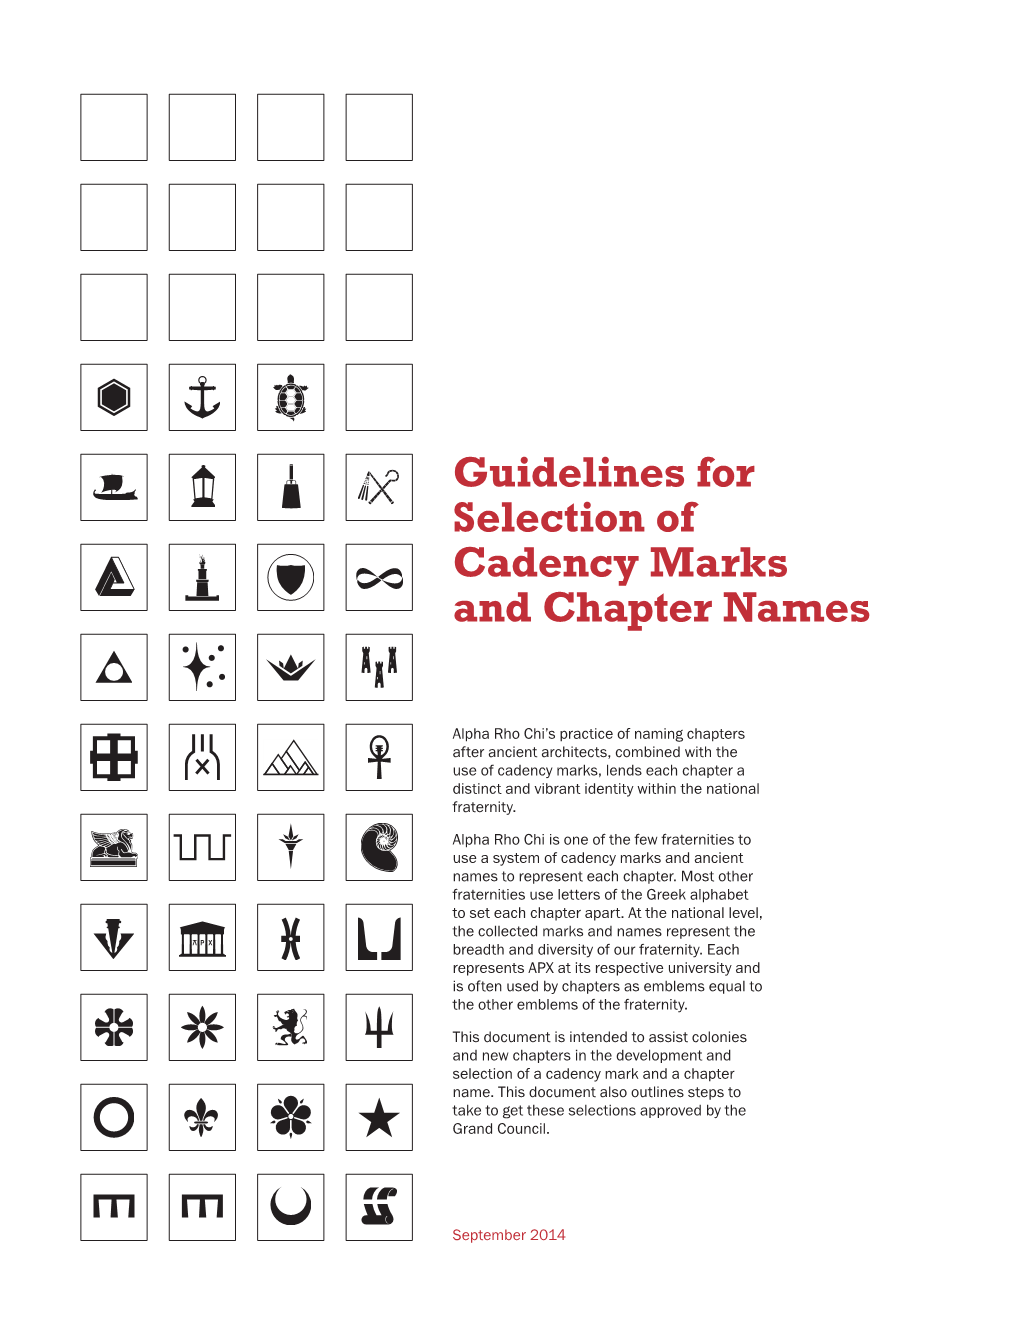 Guidelines for Selection of Cadency Marks and Chapter Names